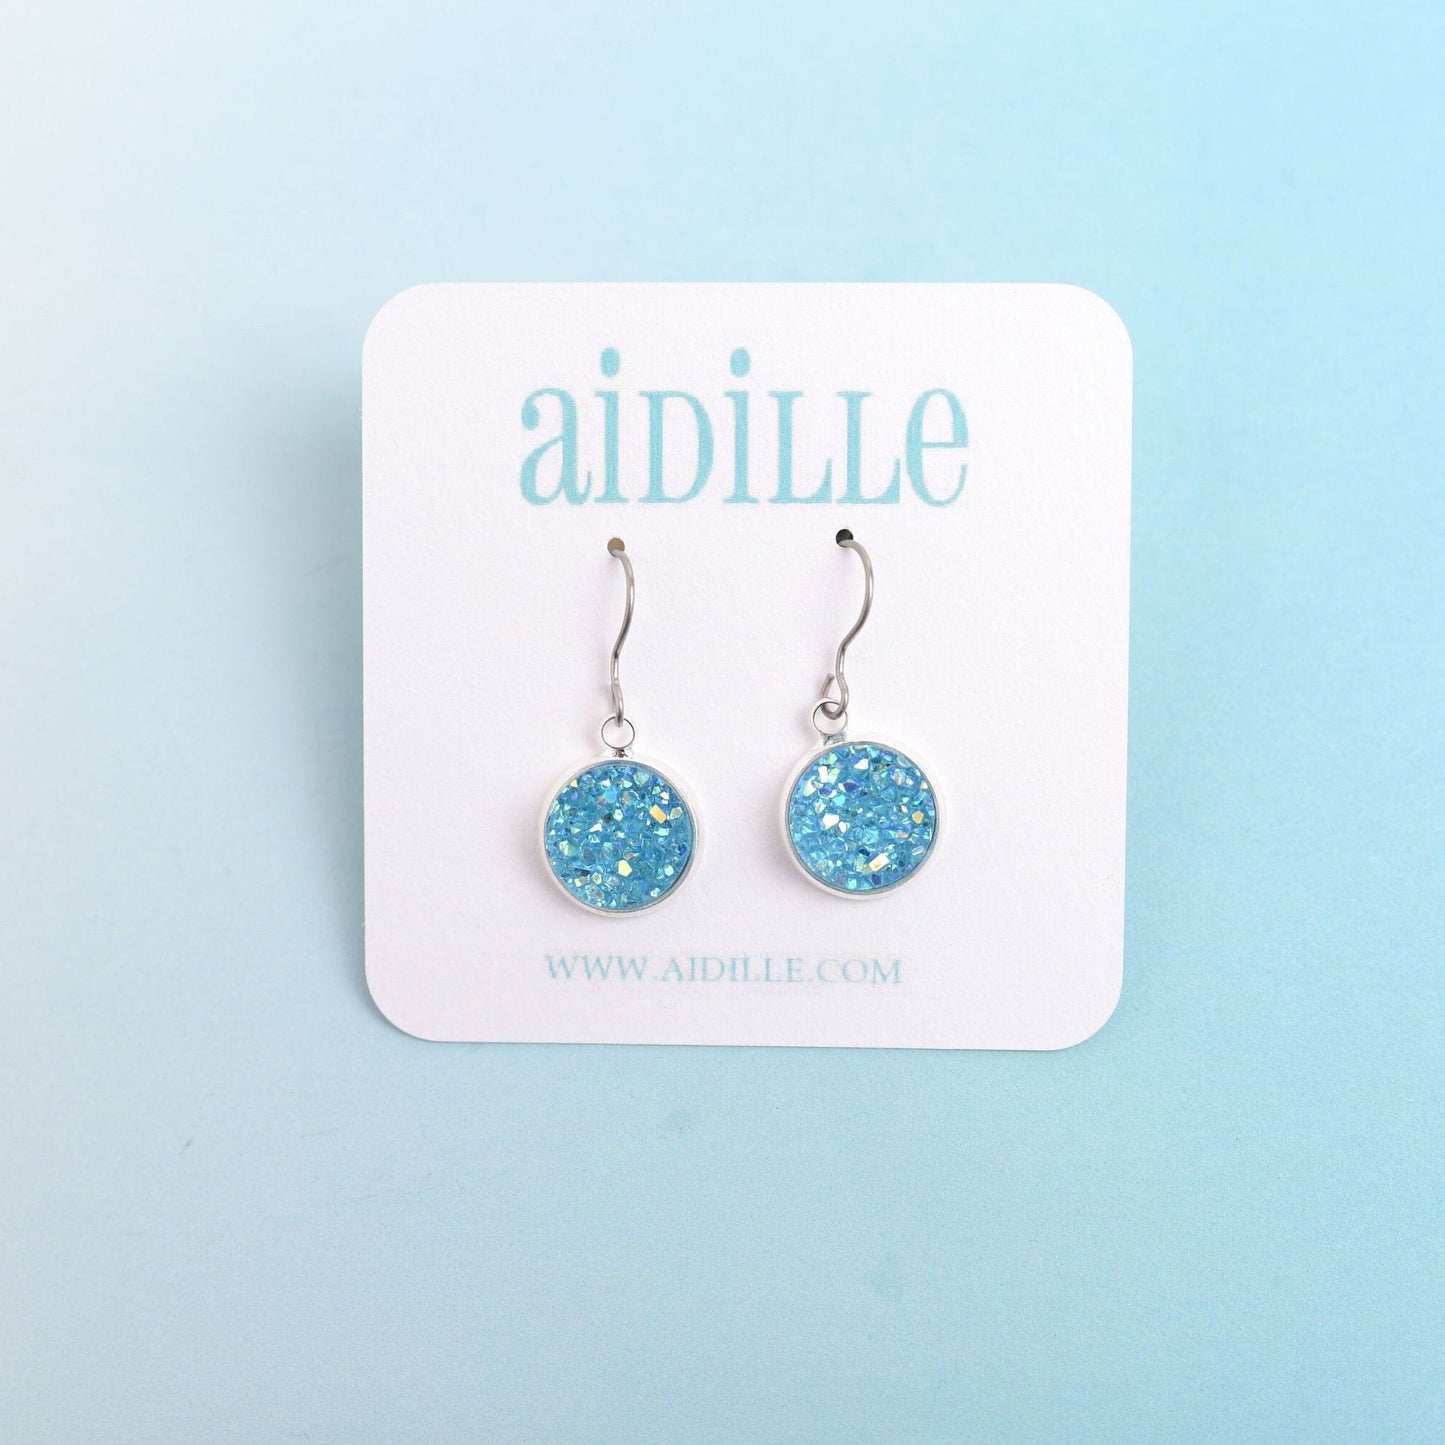 Choose Color Druzy Dangle Earrings with Titanium Ear Wires